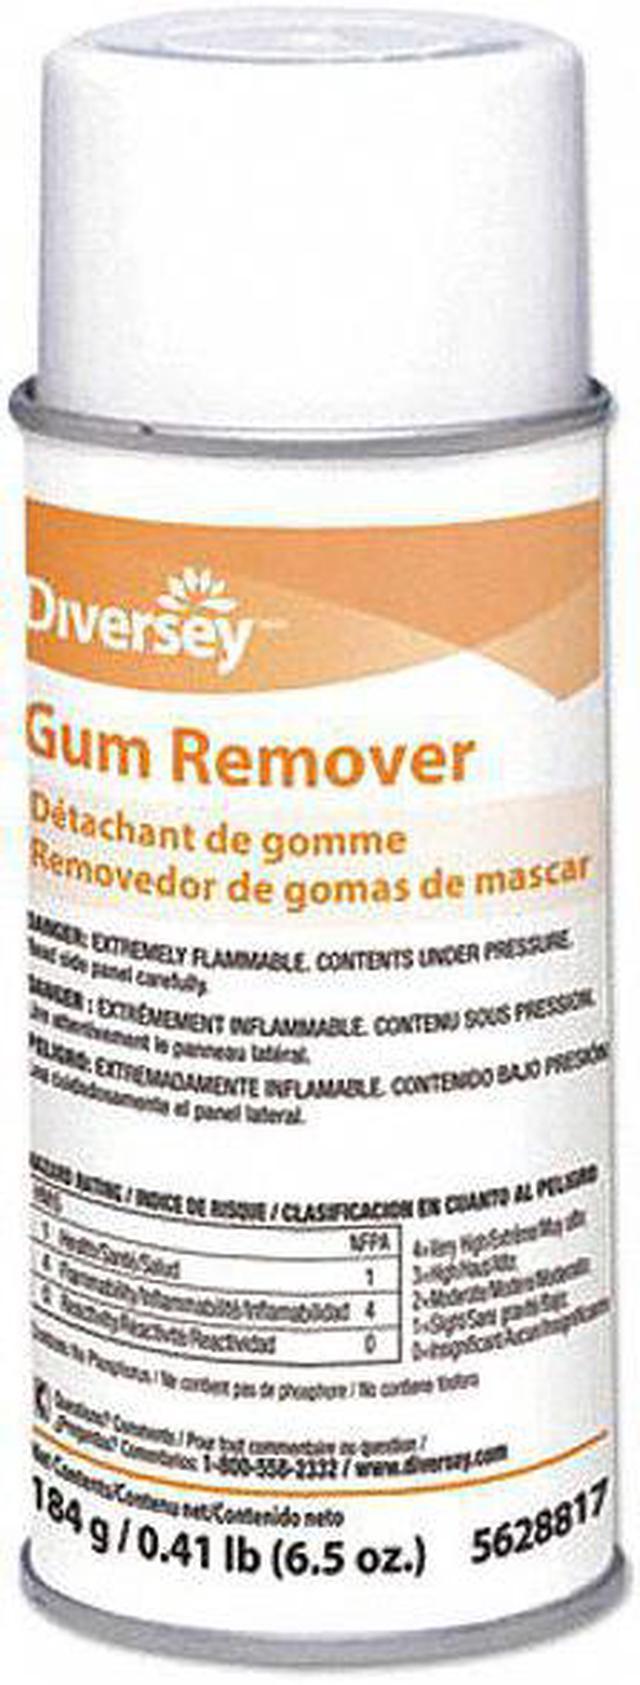 Diversey Gum and Wax Remover - Effective on the Removal of Gum, Candle Wax,  and More from Carpets, Upholstery, and Hard Surfaces - 6.5 oz. Aerosol Can:  : Industrial & Scientific